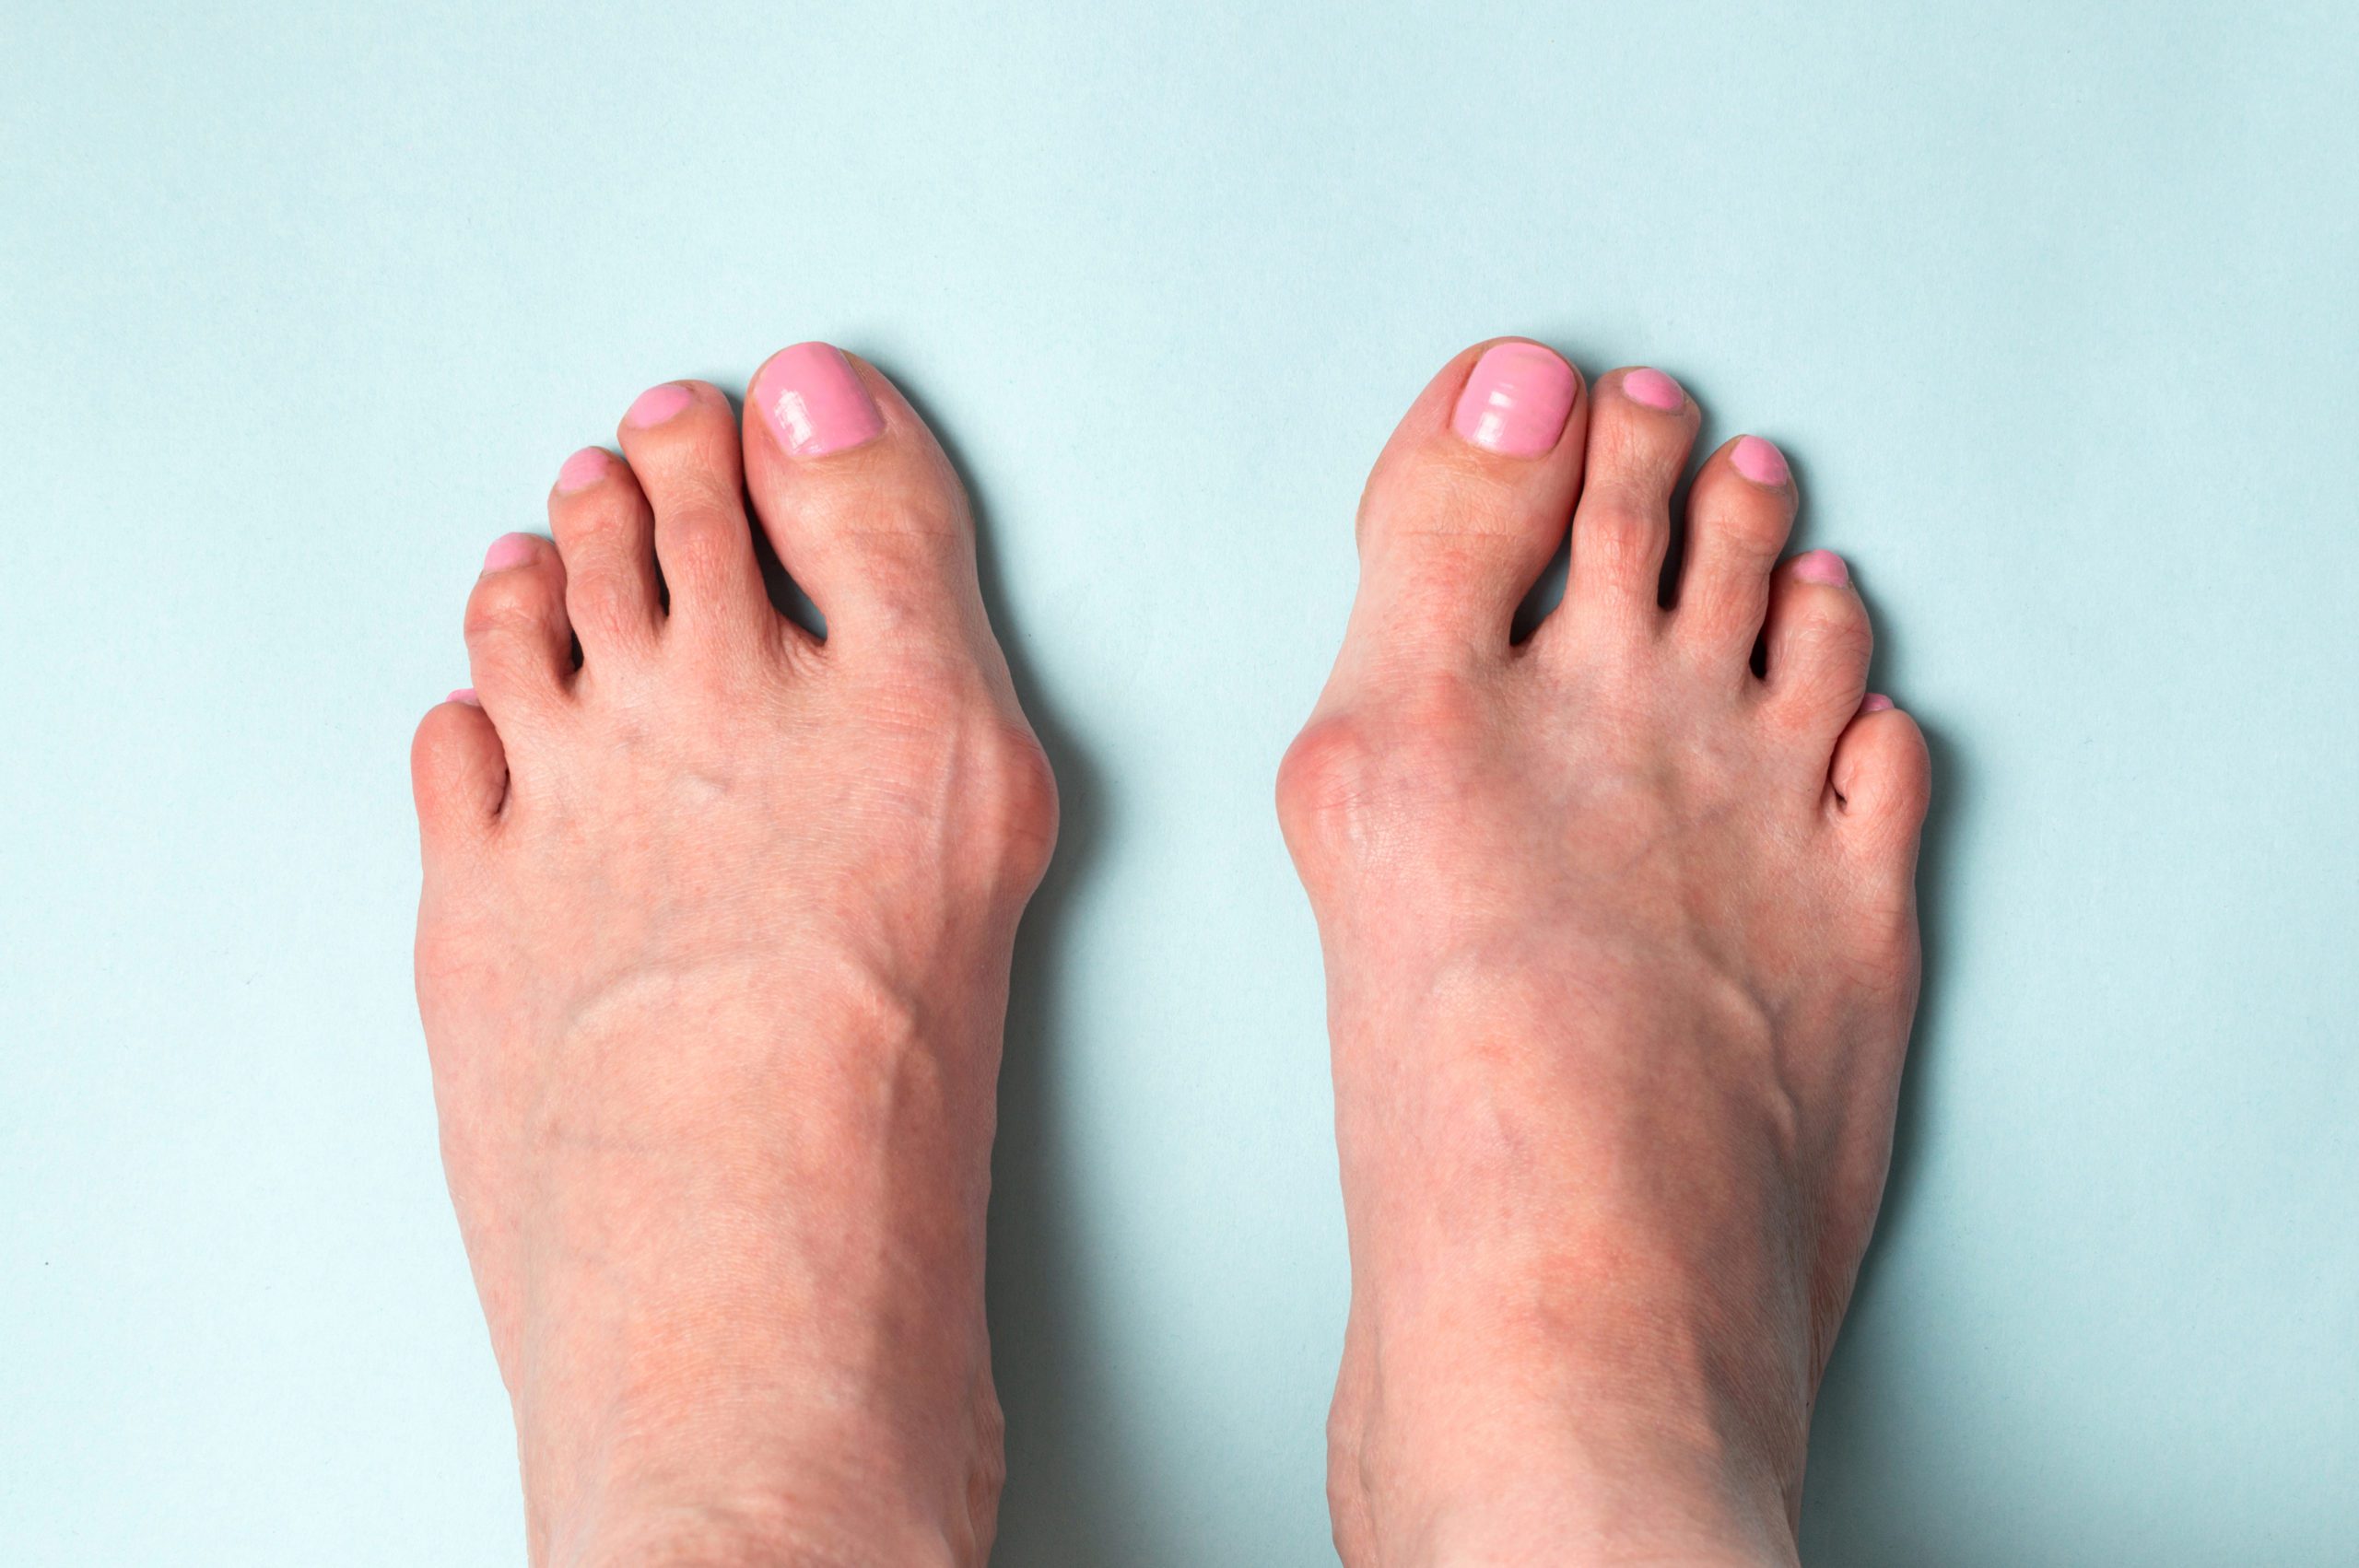 Two feet with visible bunions on the joints at the base of the big toes.